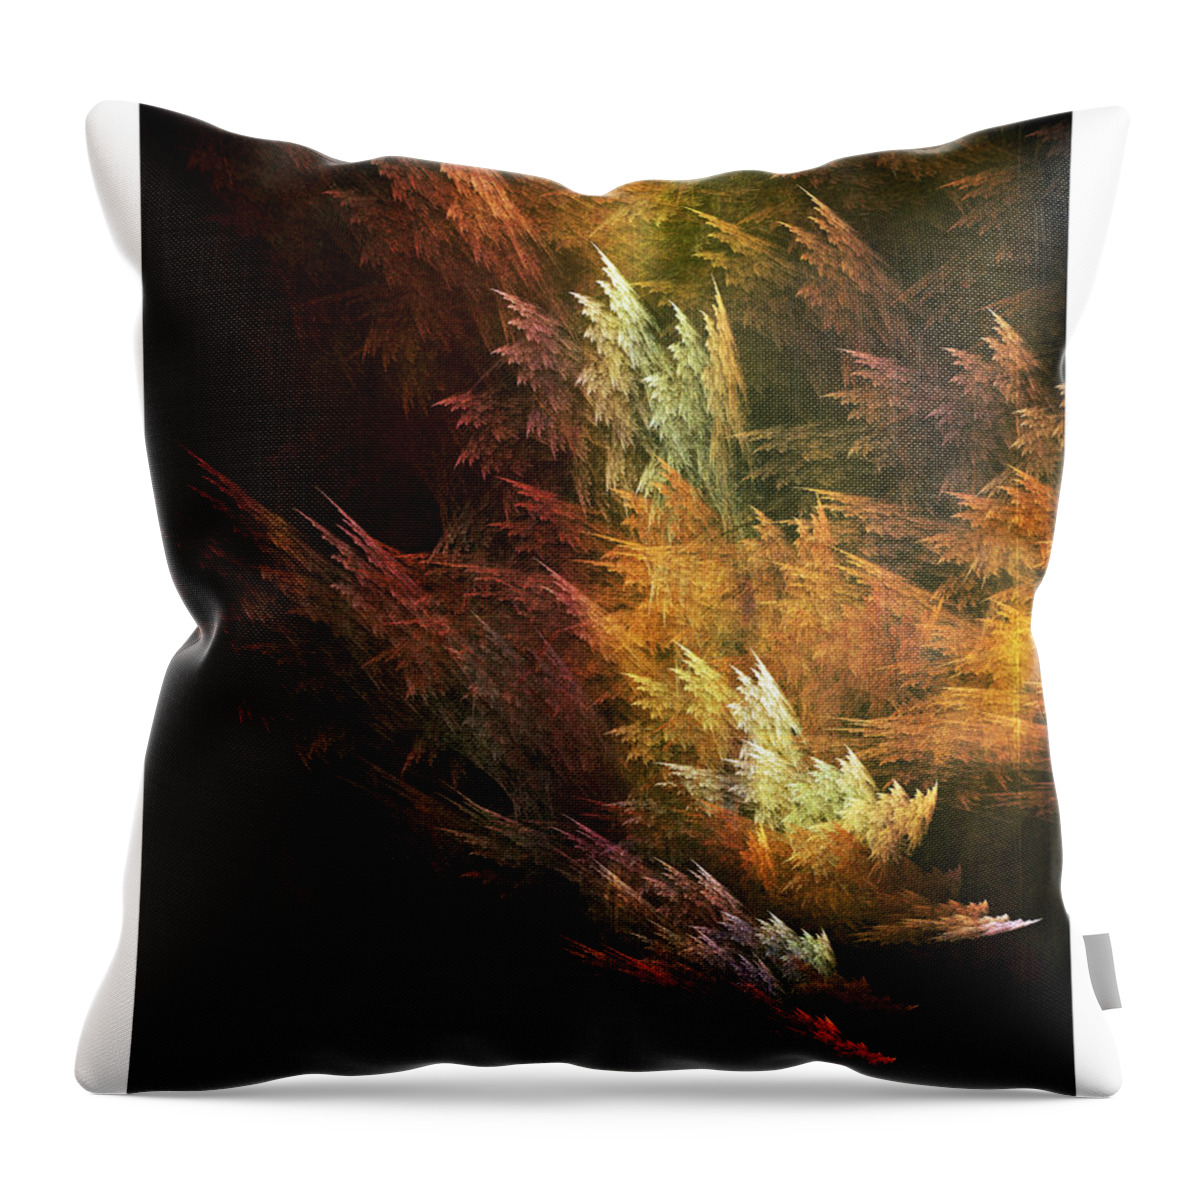 Fractal Throw Pillow featuring the digital art Fractal Forest by Bonnie Bruno